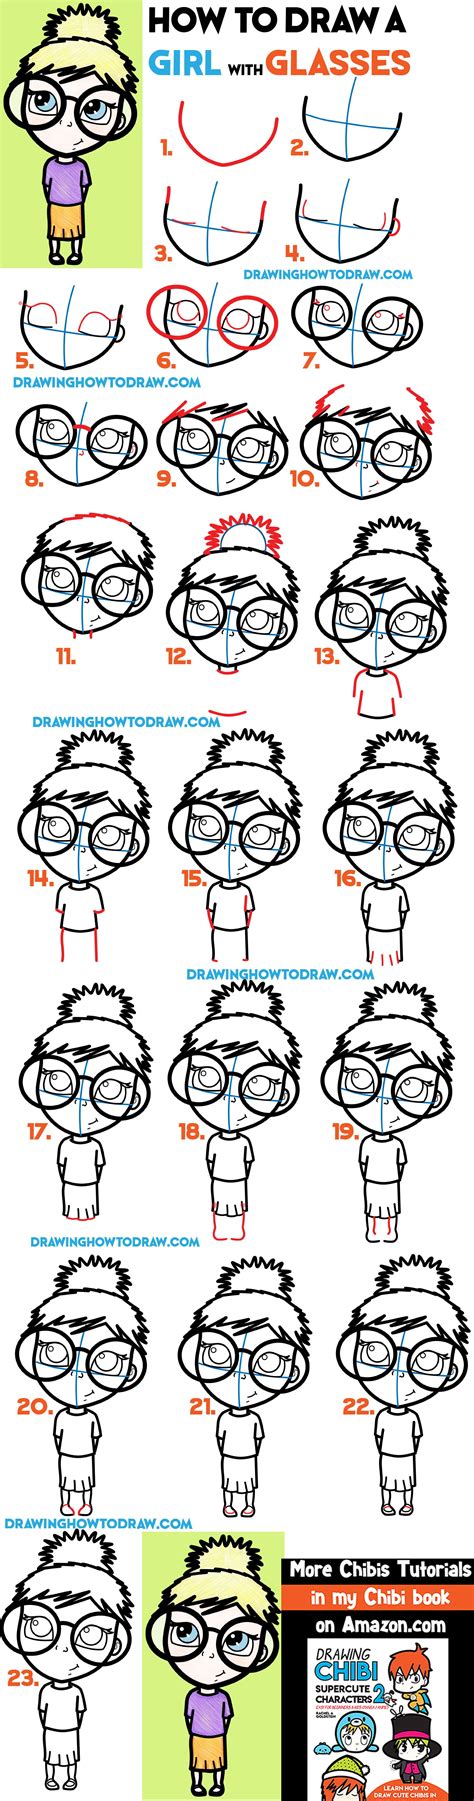 How To Draw A Cute Girl With Glasses Illustration Easy Steps Drawing